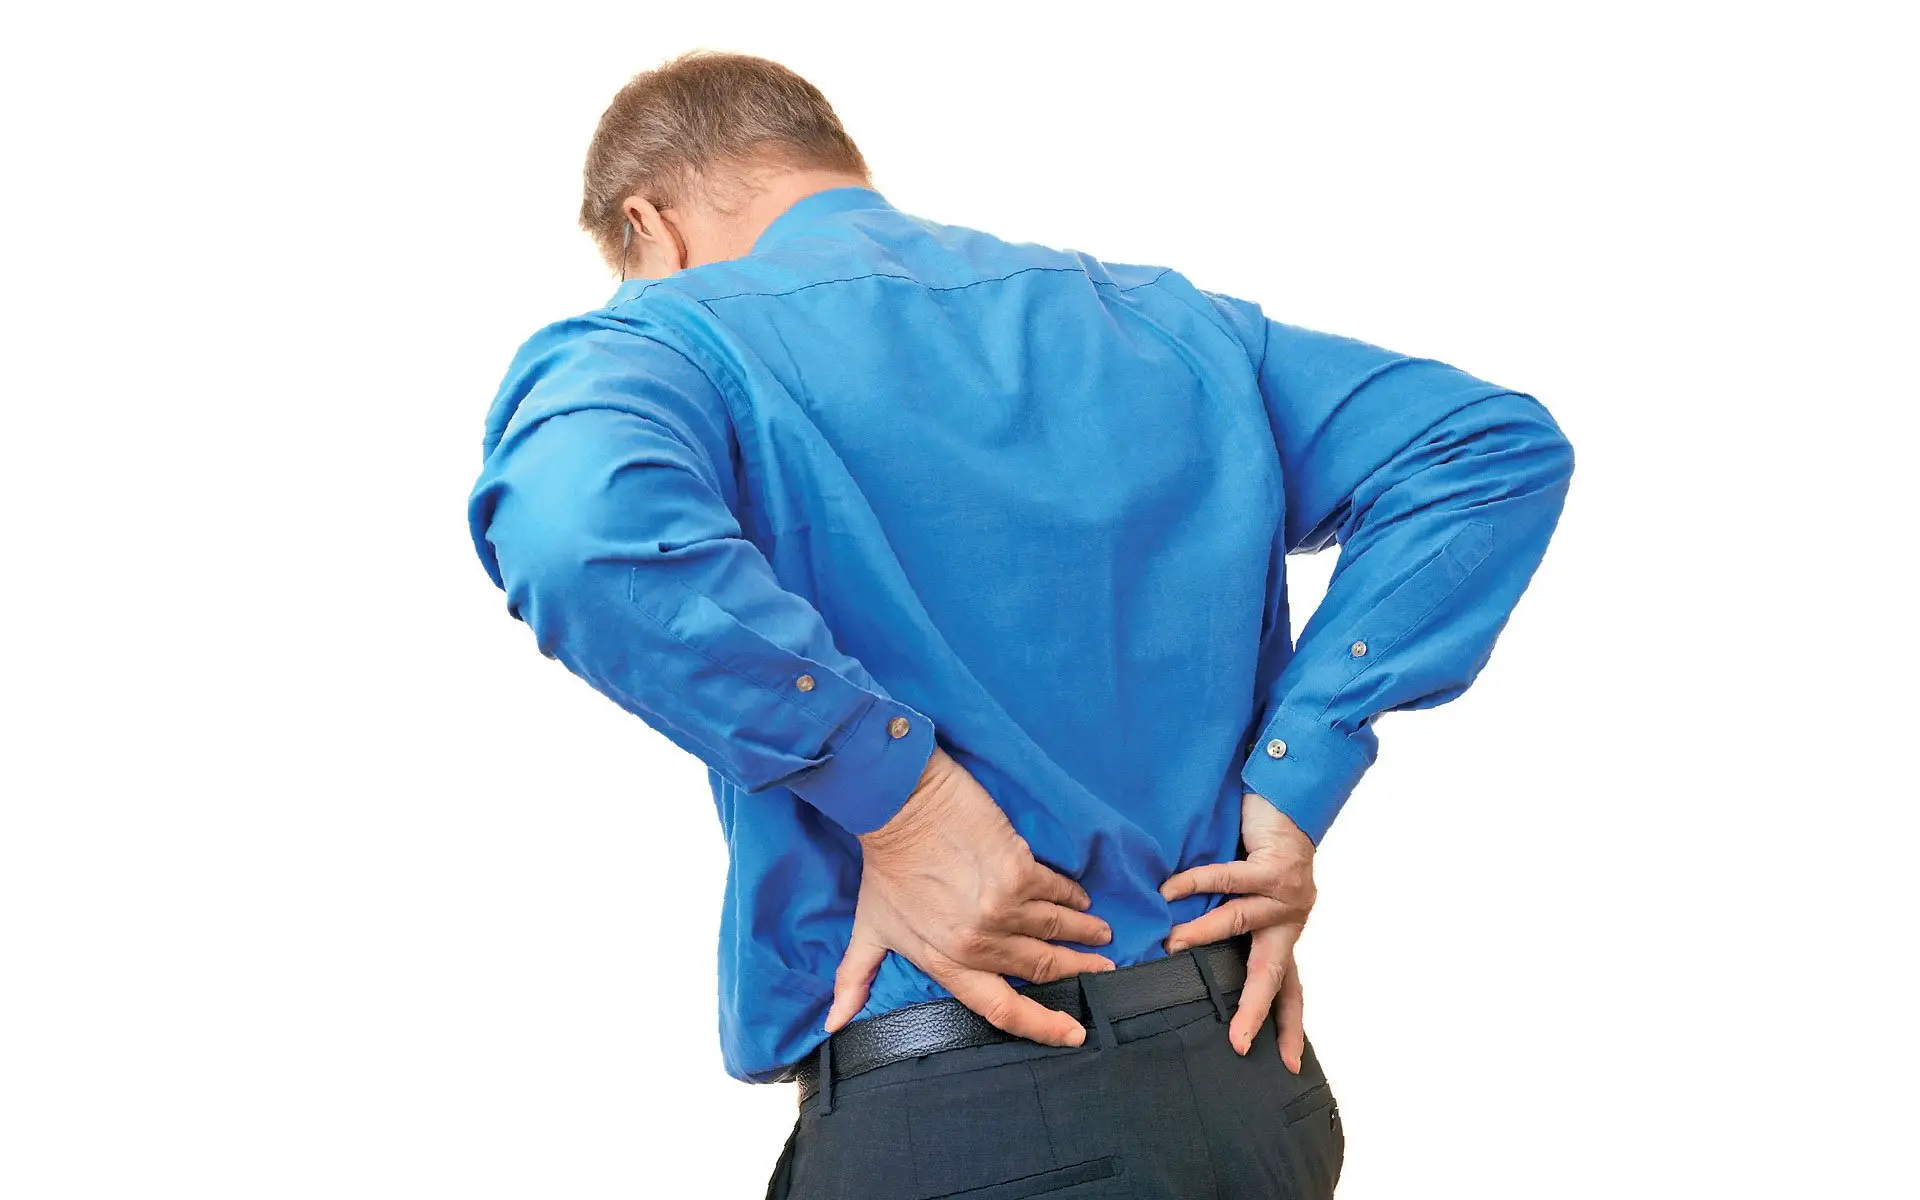 Common Symptoms of Lower Back Pain &  What to Do About Them.